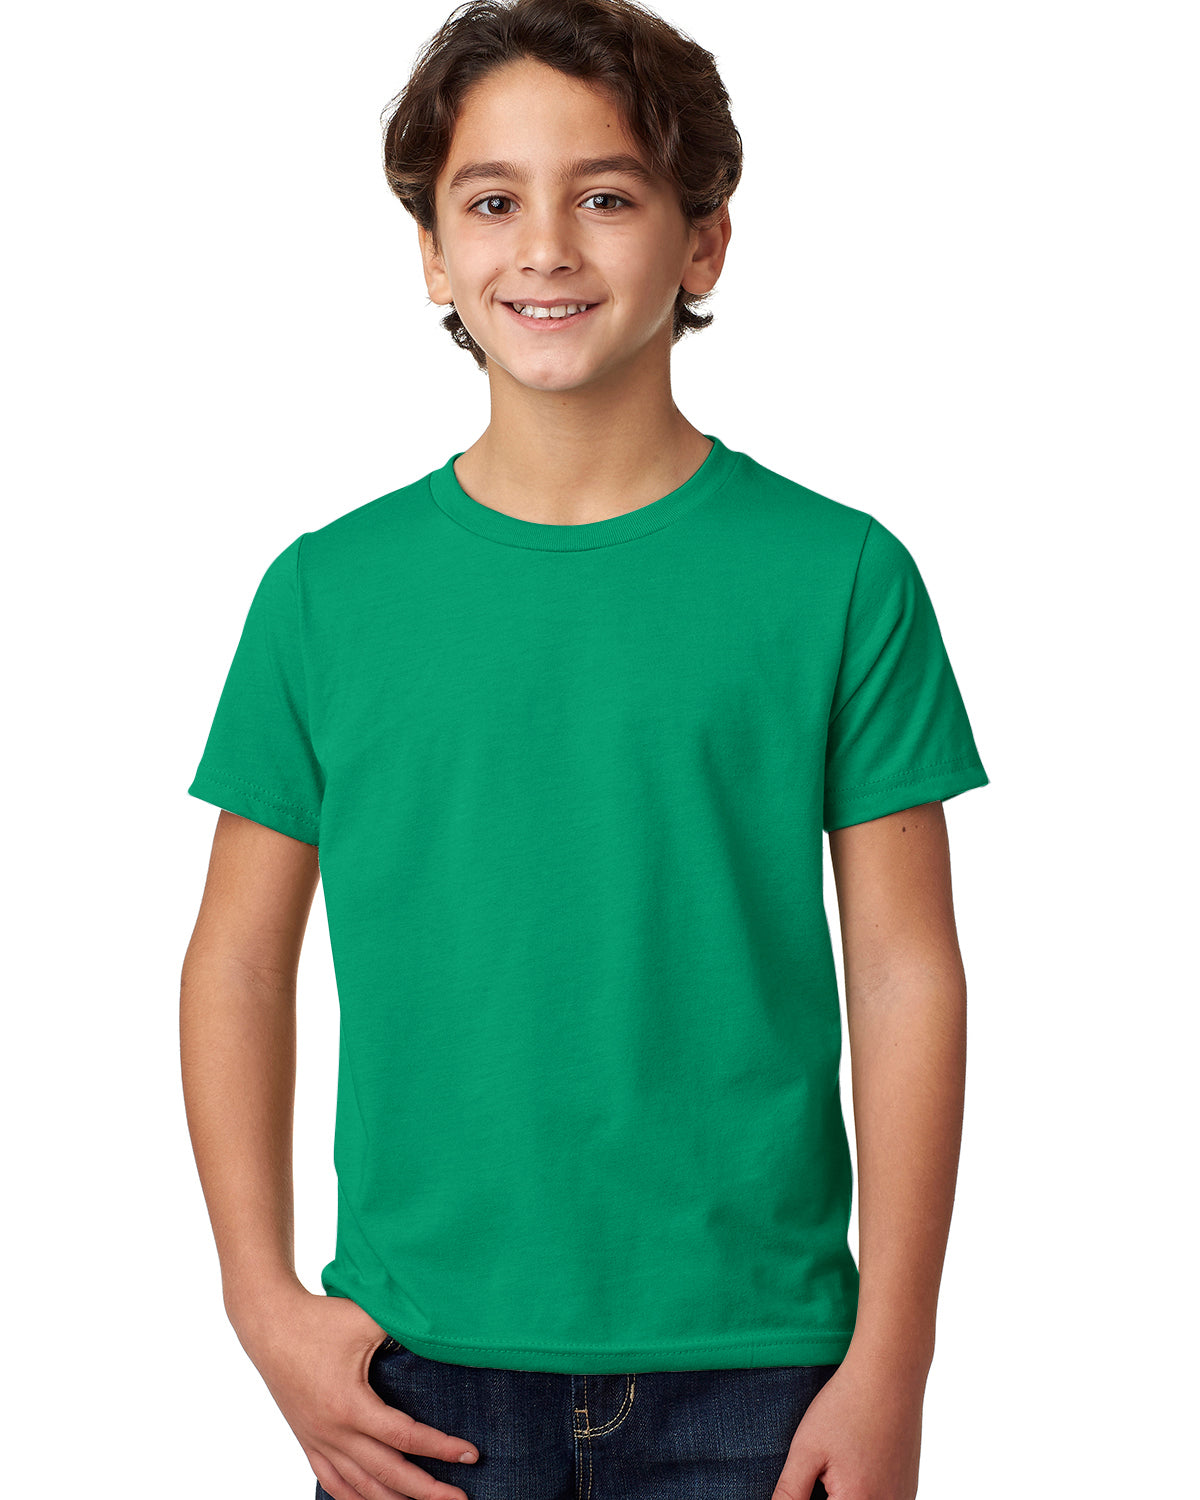 child model wearing next level youth CVC tee in kelly green